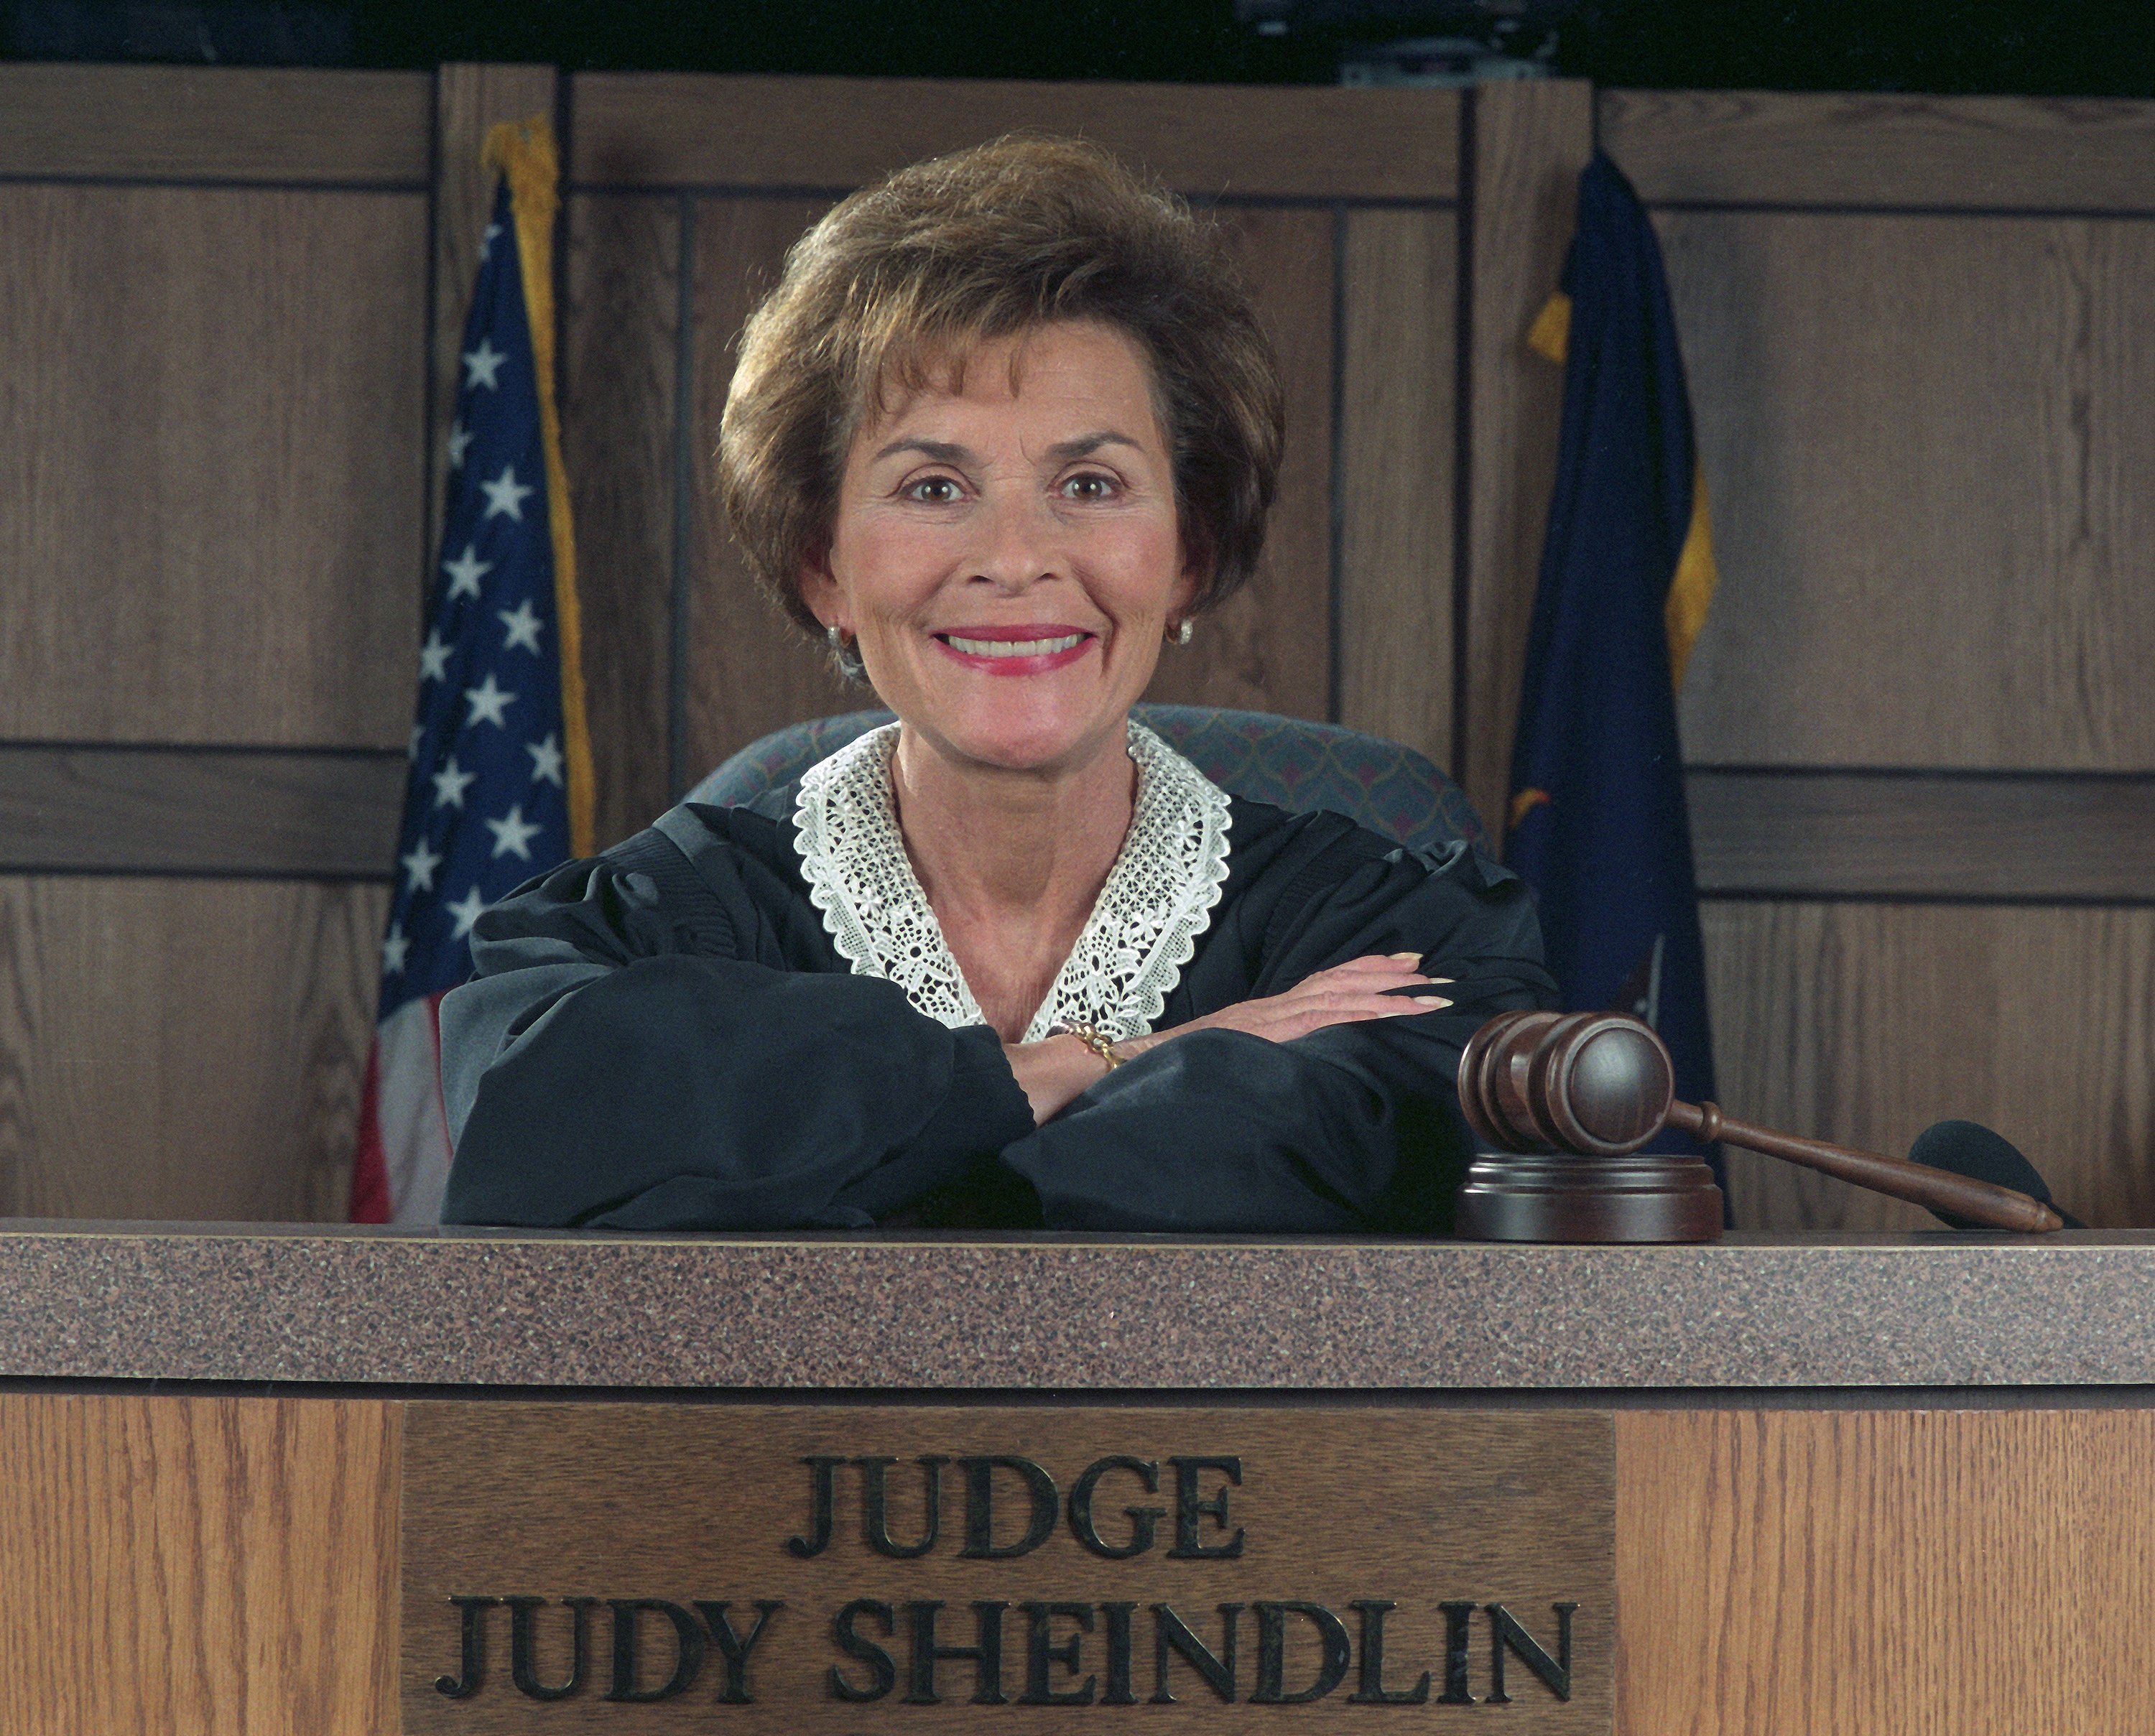 Judge Judy Sheindlin on December 2, 1997 in Los Angeles, California. | Source: Getty Images